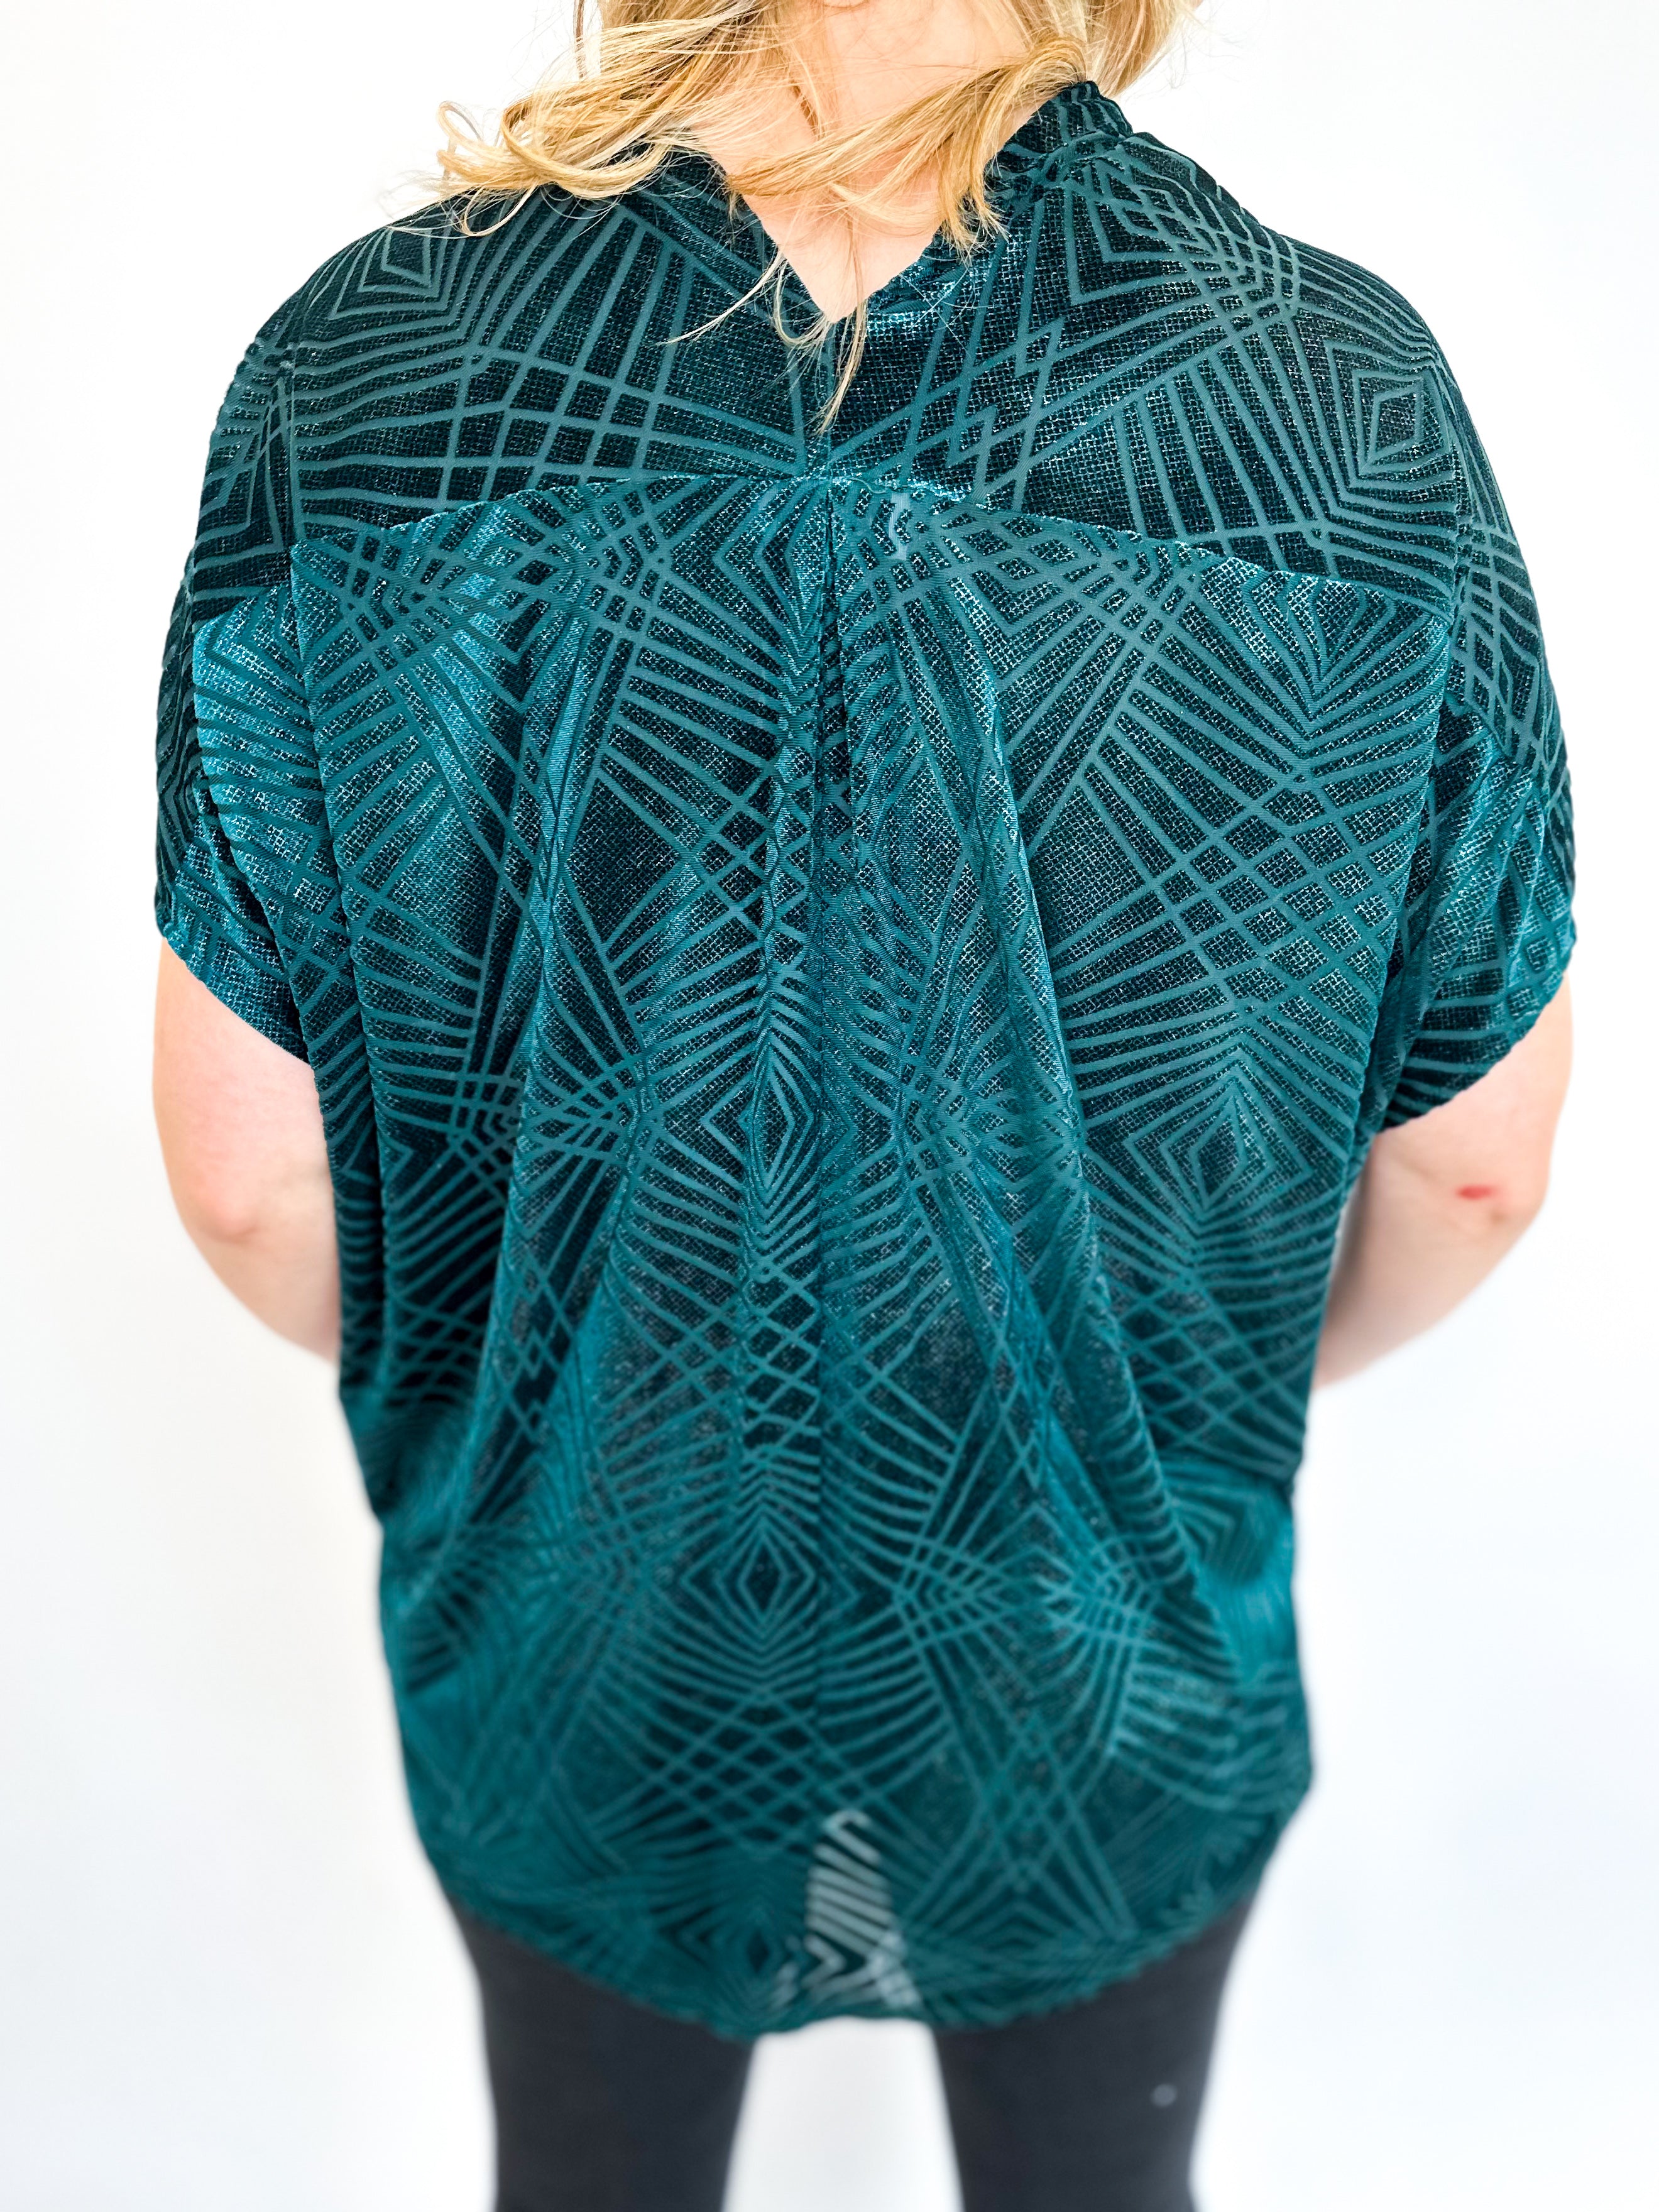 Winter Teal Velvet Blouse-200 Fashion Blouses-ADRIENNE-July & June Women's Fashion Boutique Located in San Antonio, Texas